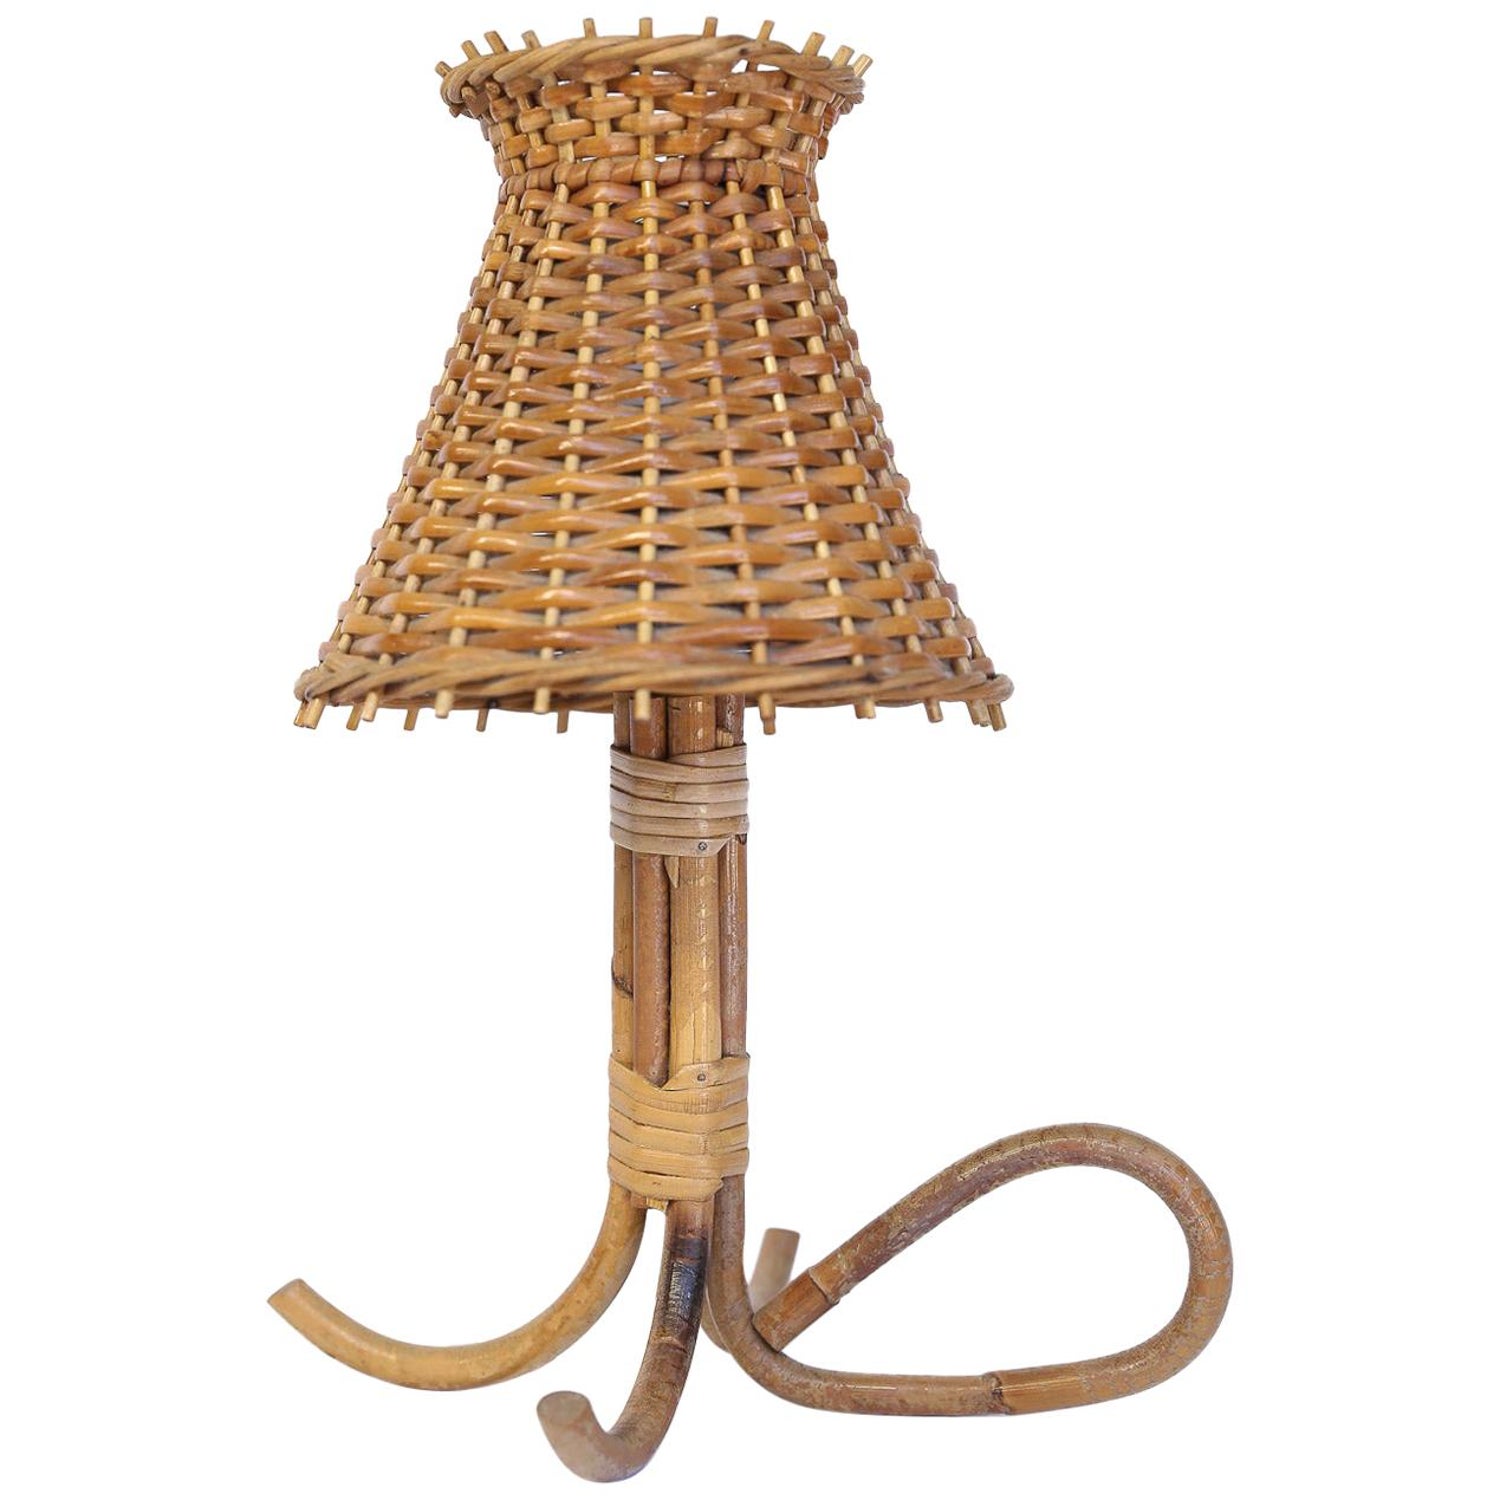 Vintage French Rattan Lamp At 1stdibs, Vintage French Lamp Shades